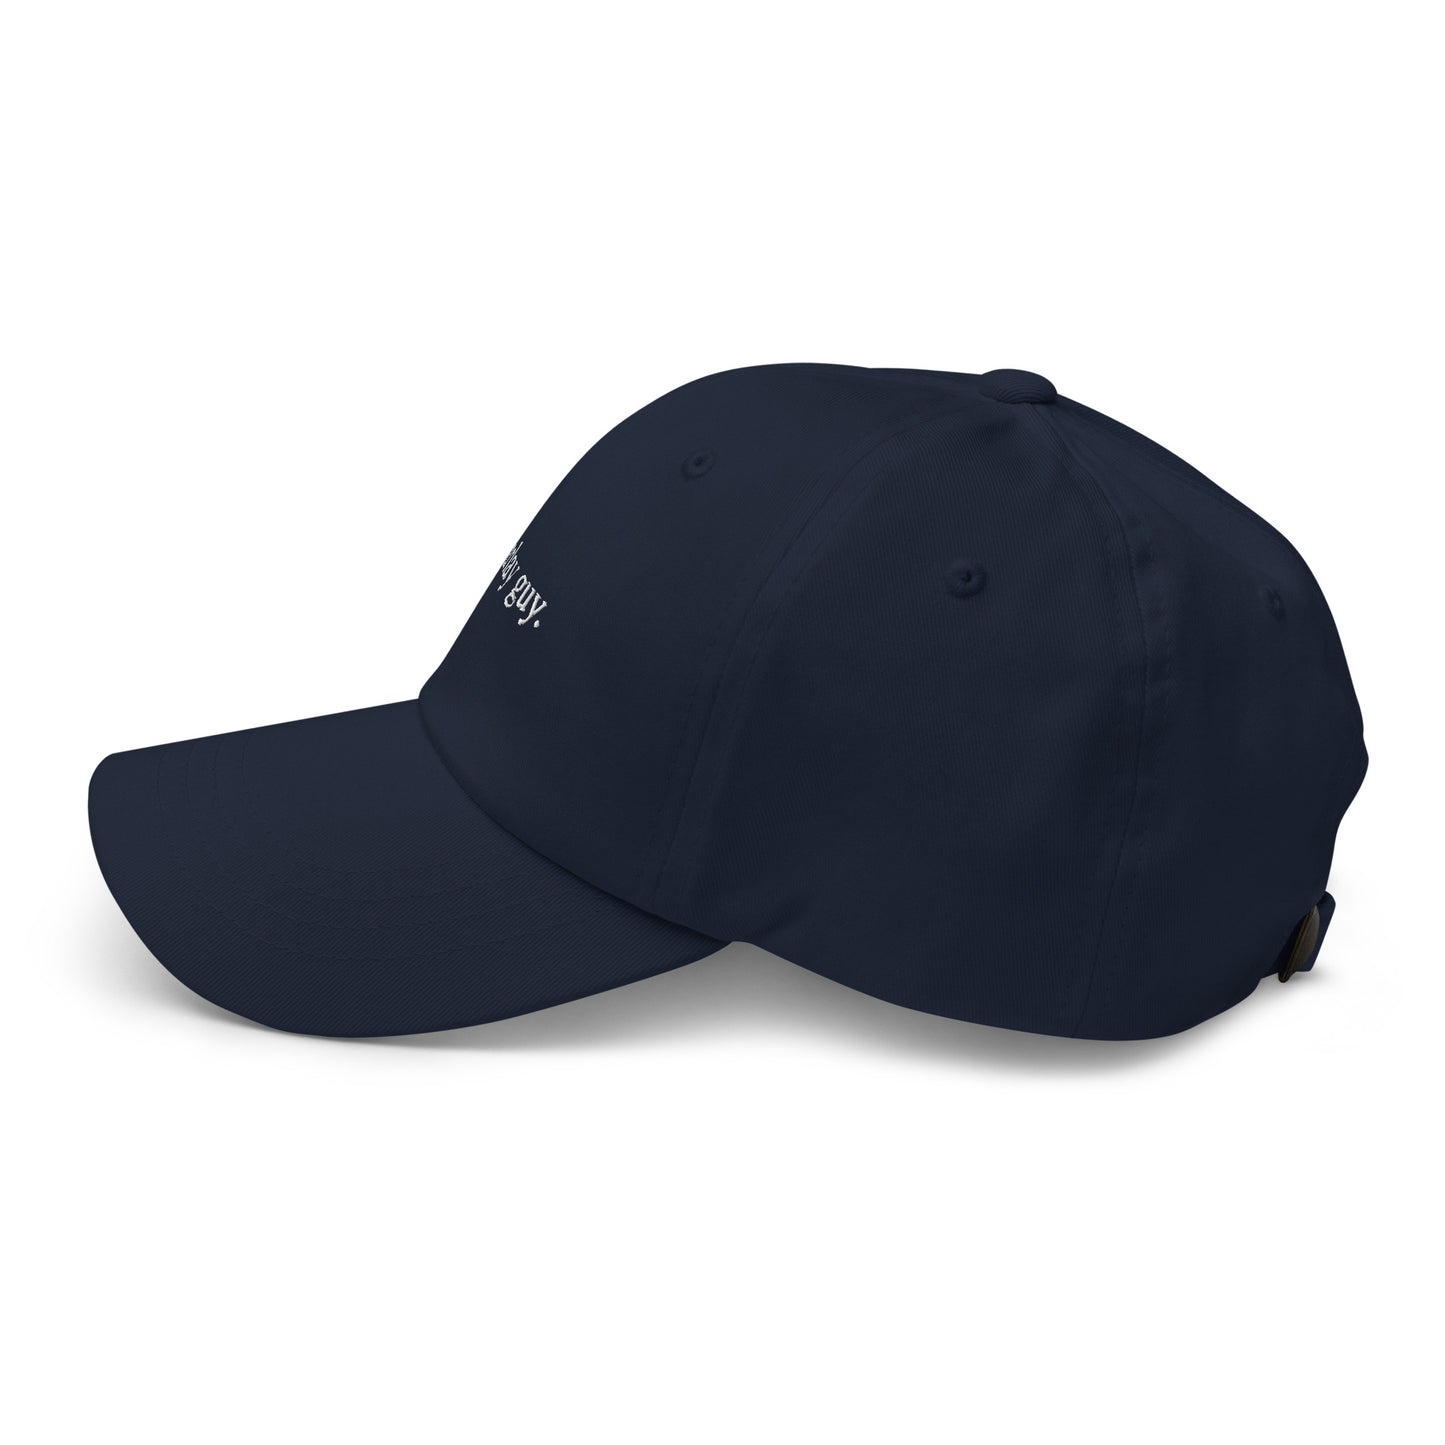 parlay guy hat